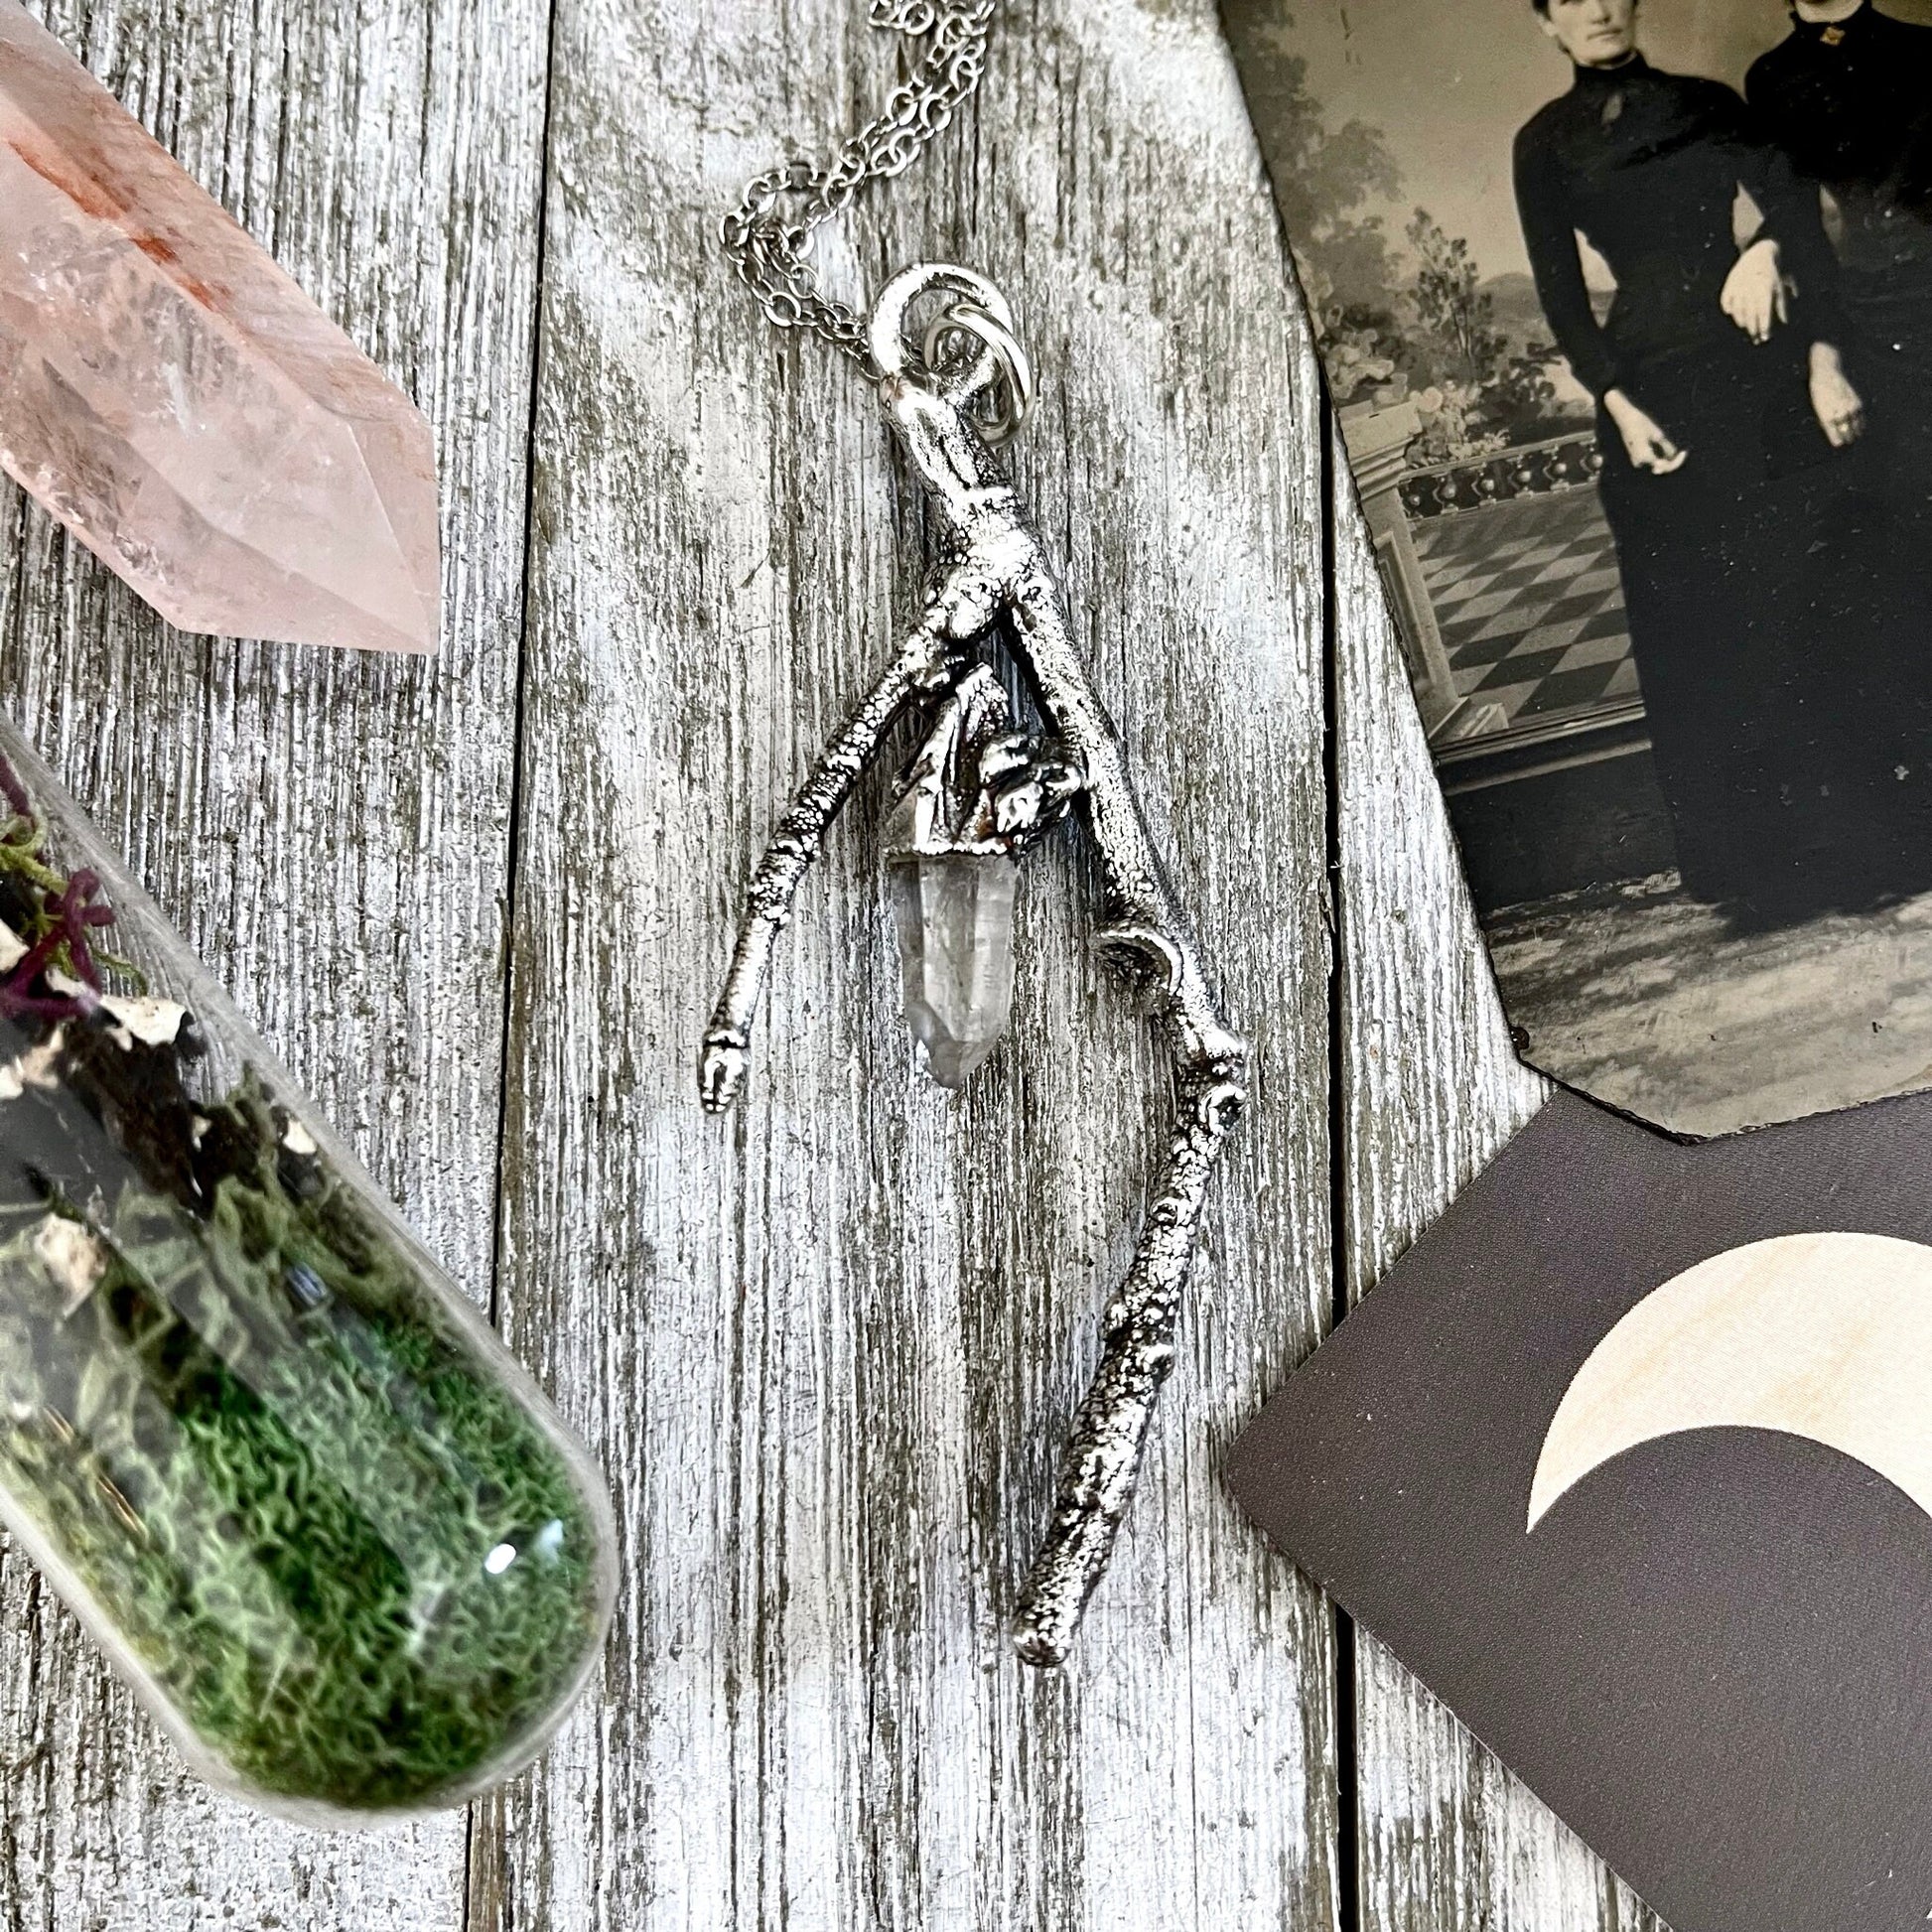 big crystal Necklace, Big Gothic Necklace, Bohemian Jewelry, clear quartz, Crystal Necklaces, Crystal Pendant, Etsy ID: 1601122993, FOXLARK- NECKLACES, Jewelry, nature inspired, Necklaces, Silver Jewelry, Silver Necklace, Silver Stone Jewelry, Statement N